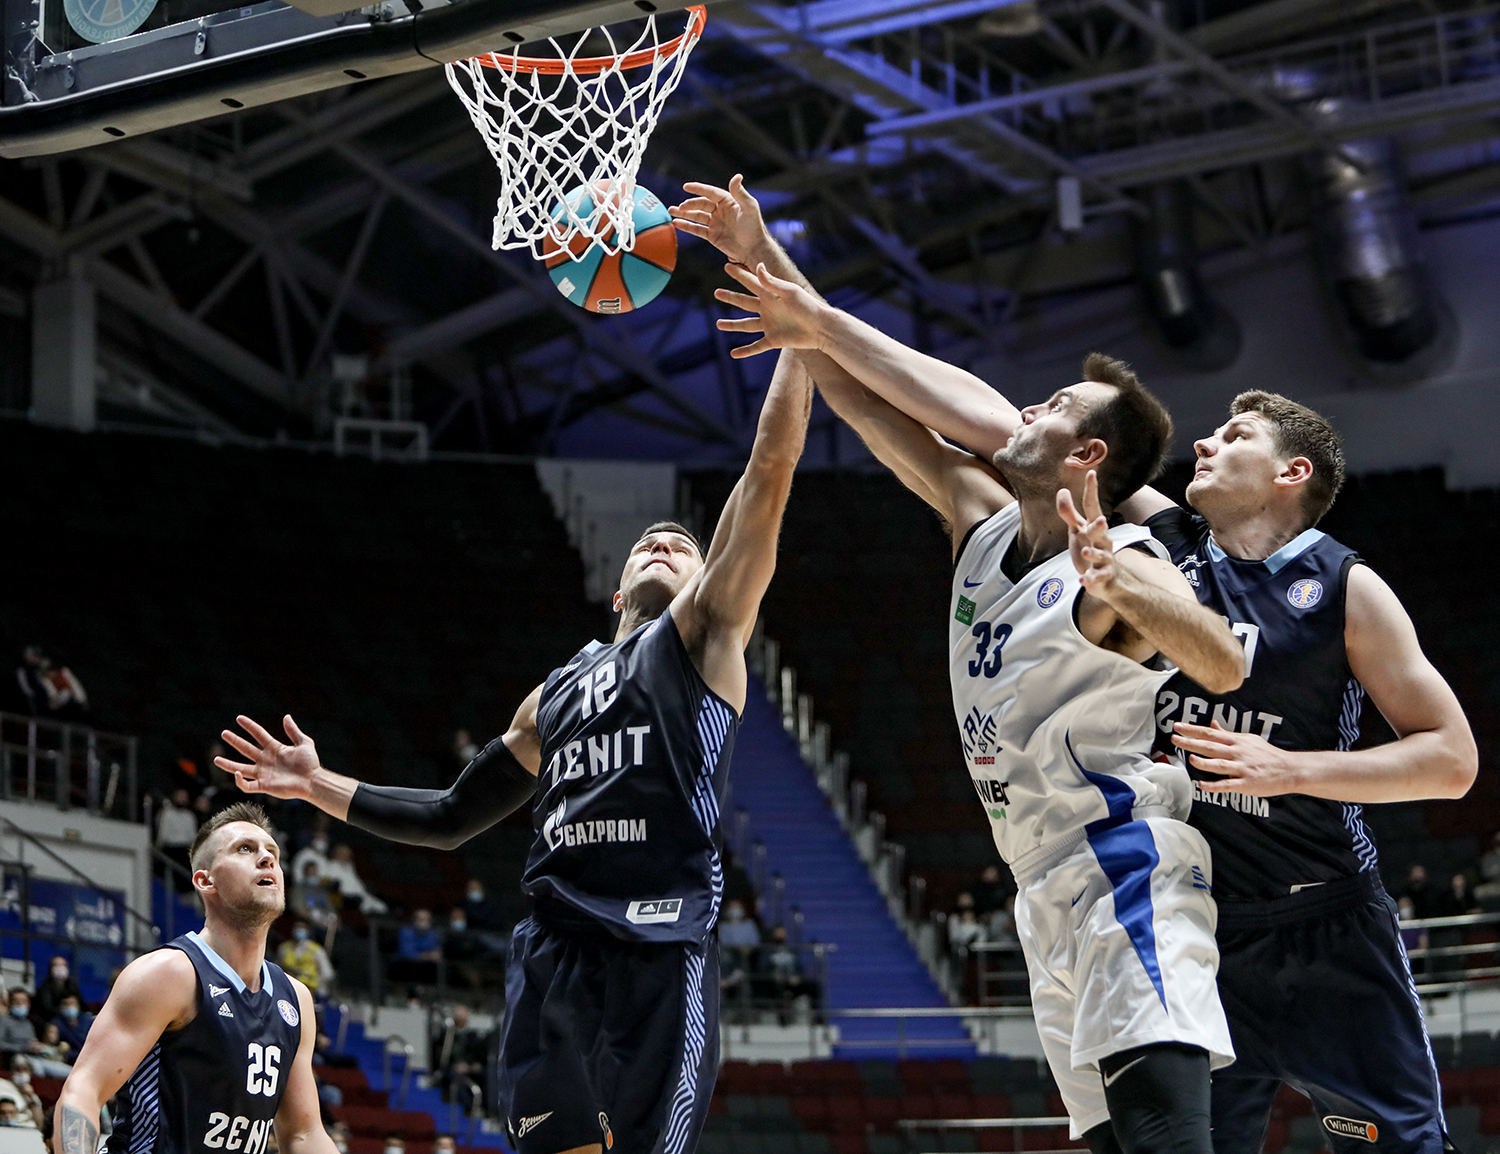 Zenit’s defense stopped Kalev’s striking offence in the first regular season game